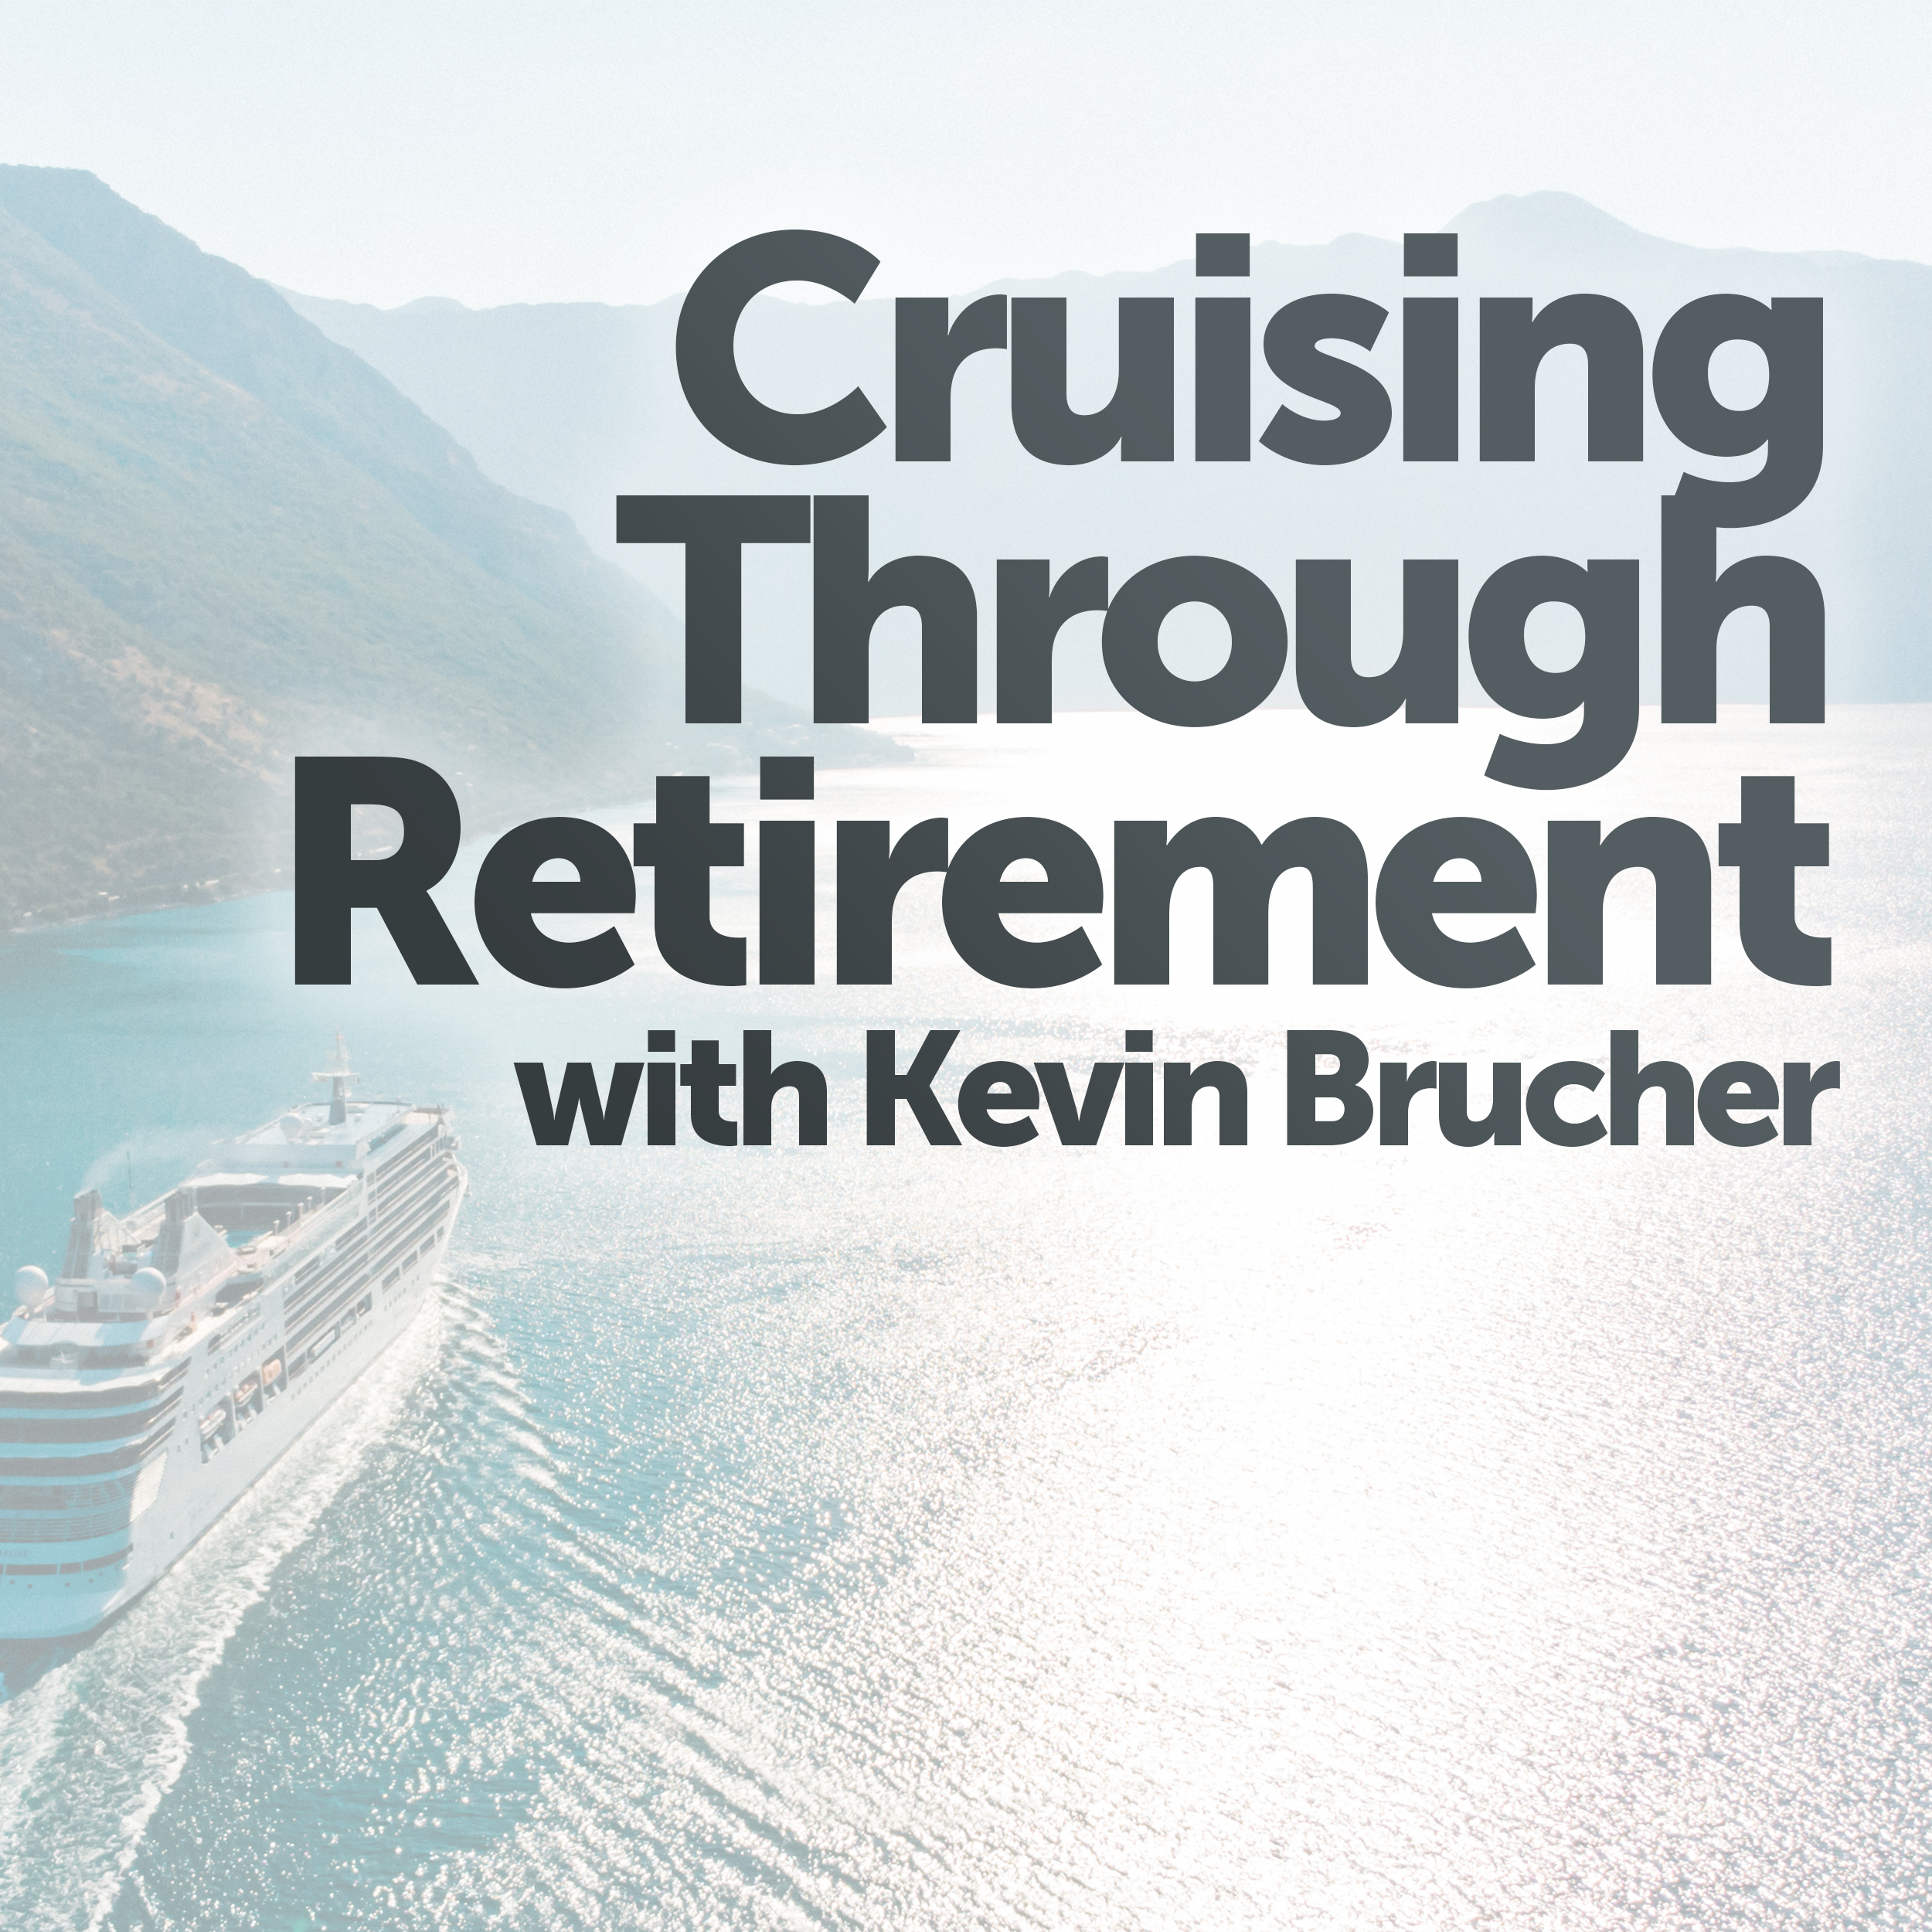 Cruising Through Retirement This week we’ll go over some key ages to consider in the retirement planning process.